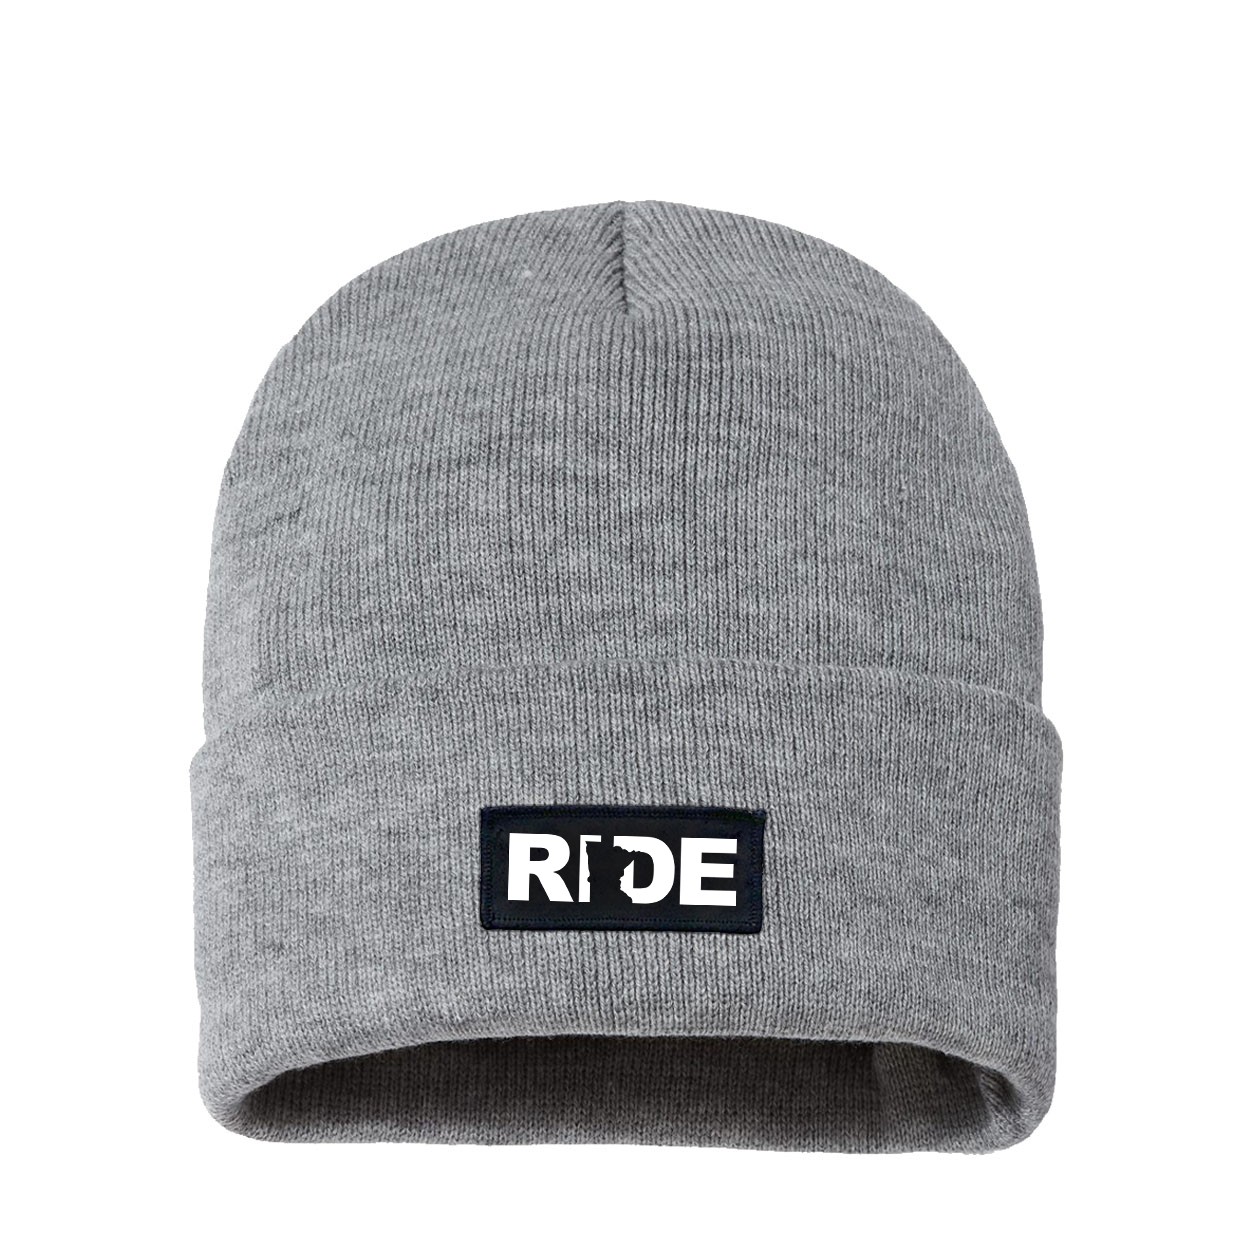 Ride Minnesota Night Out Woven Patch Night Out Sherpa Lined Cuffed Beanie Heather Gray (White Logo)